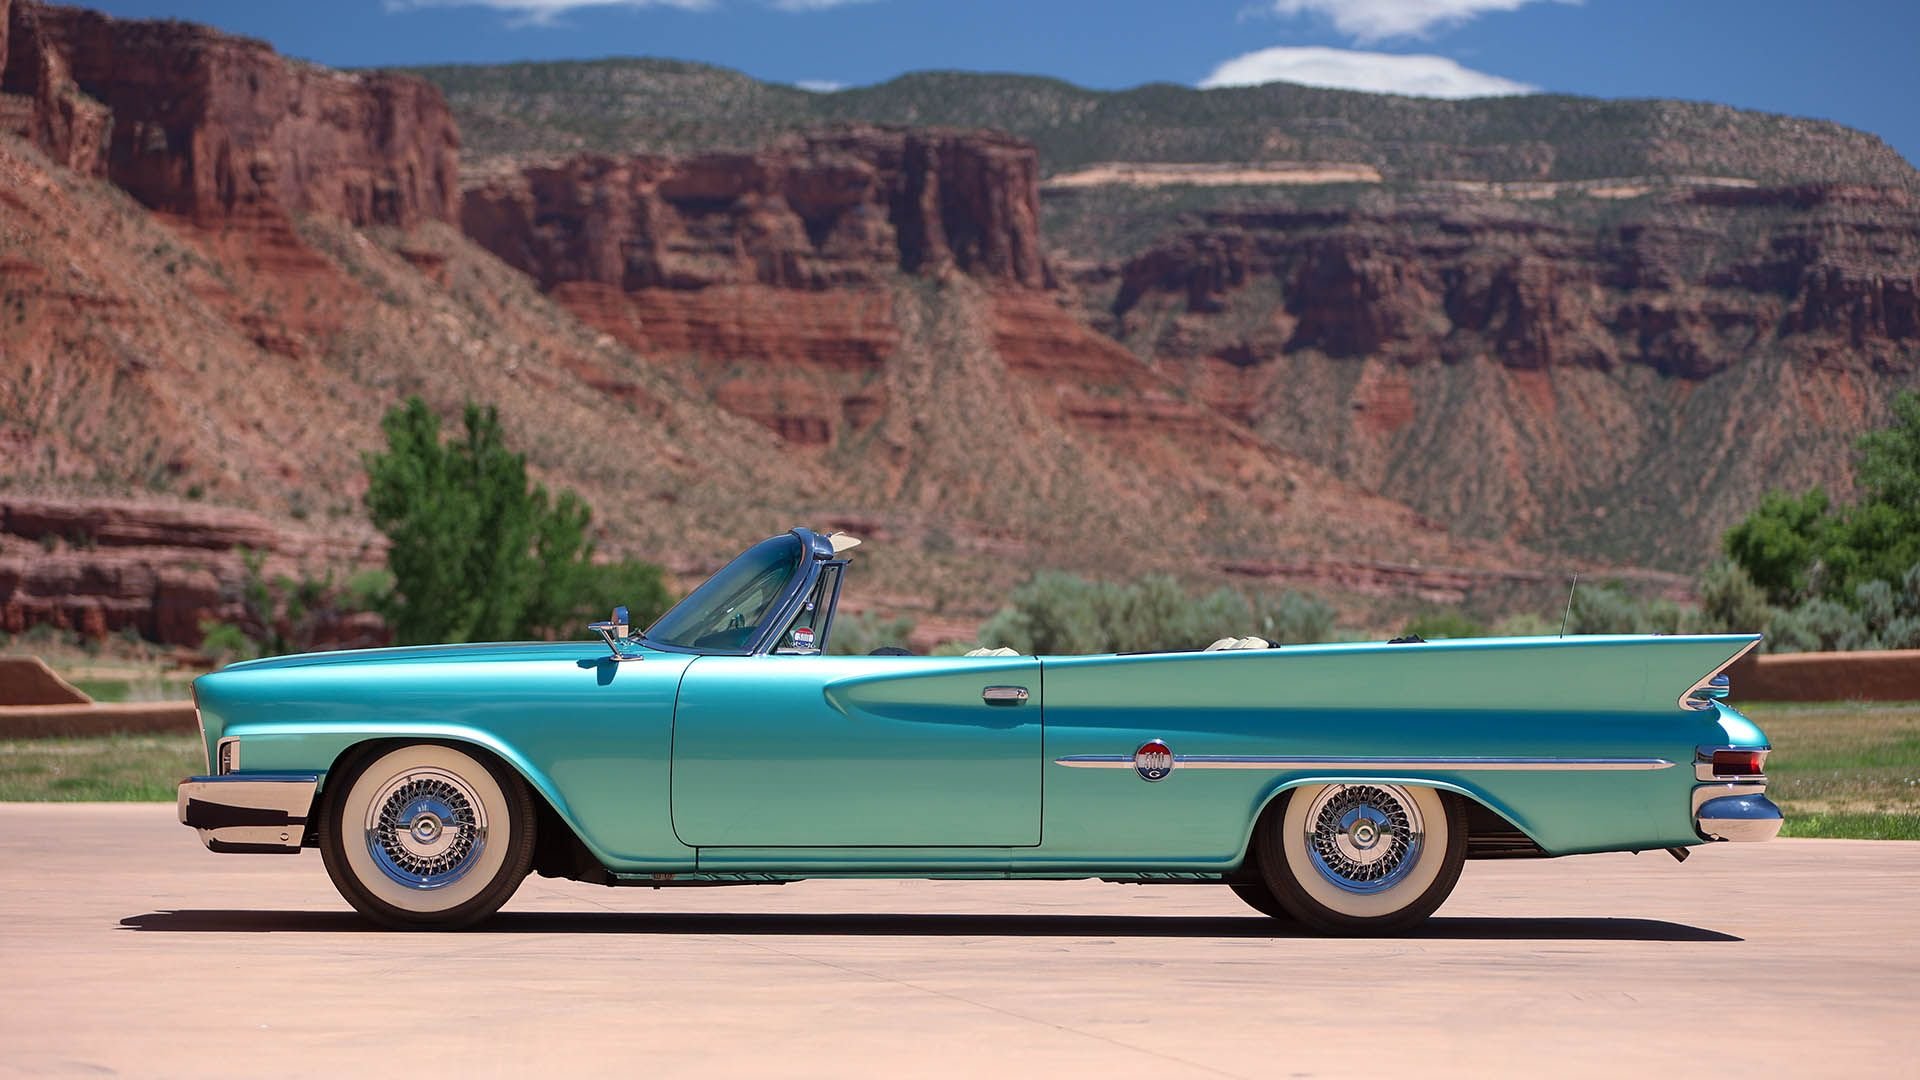 Broad Arrow Auctions | 1961 Chrysler 300 G Convertible